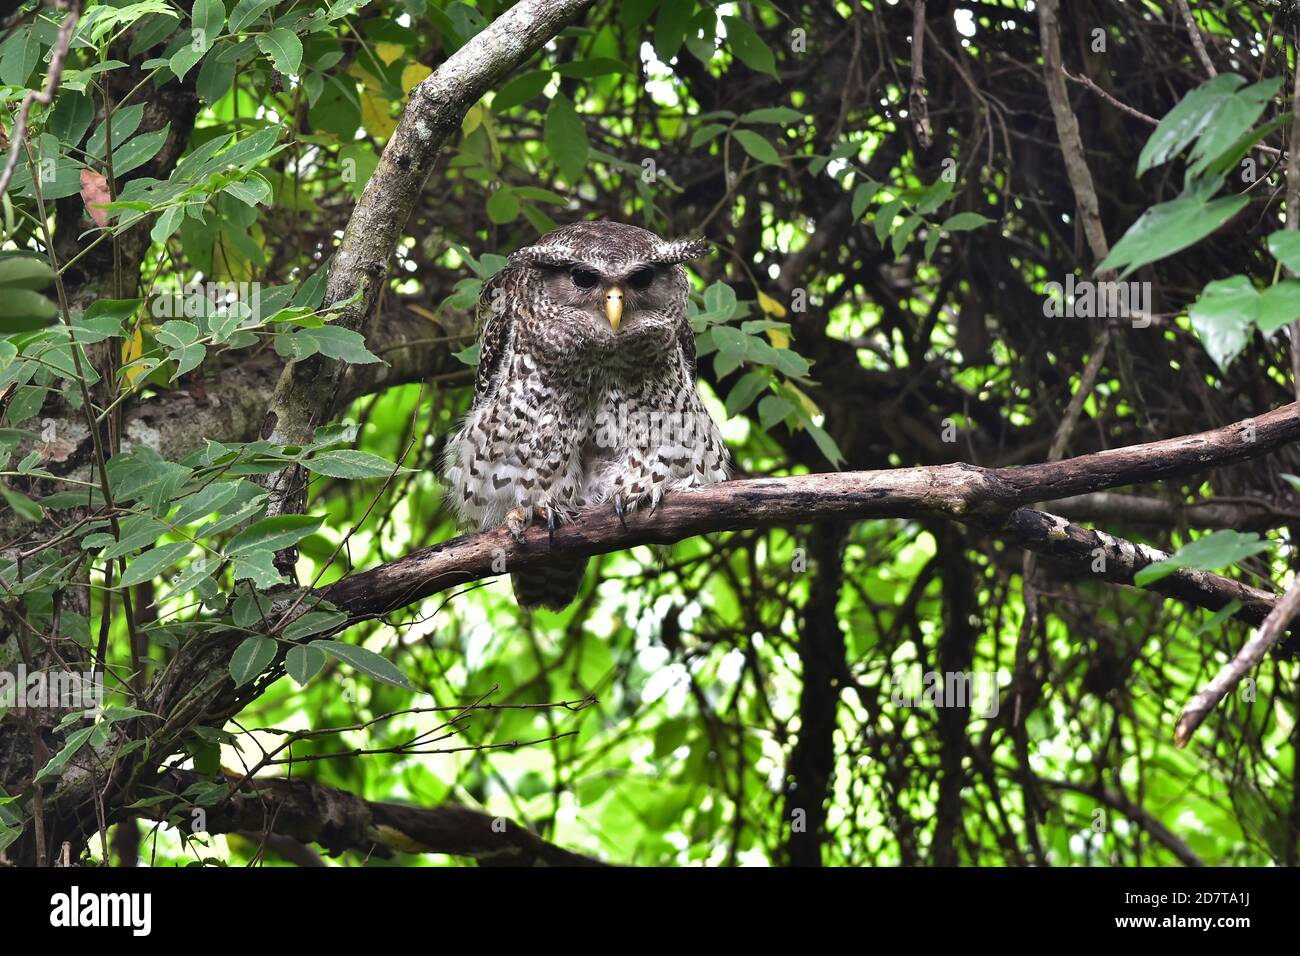 Spot-Bellied Eagle Owl bird sitting on the tree in nature, Thailand Stock Photo